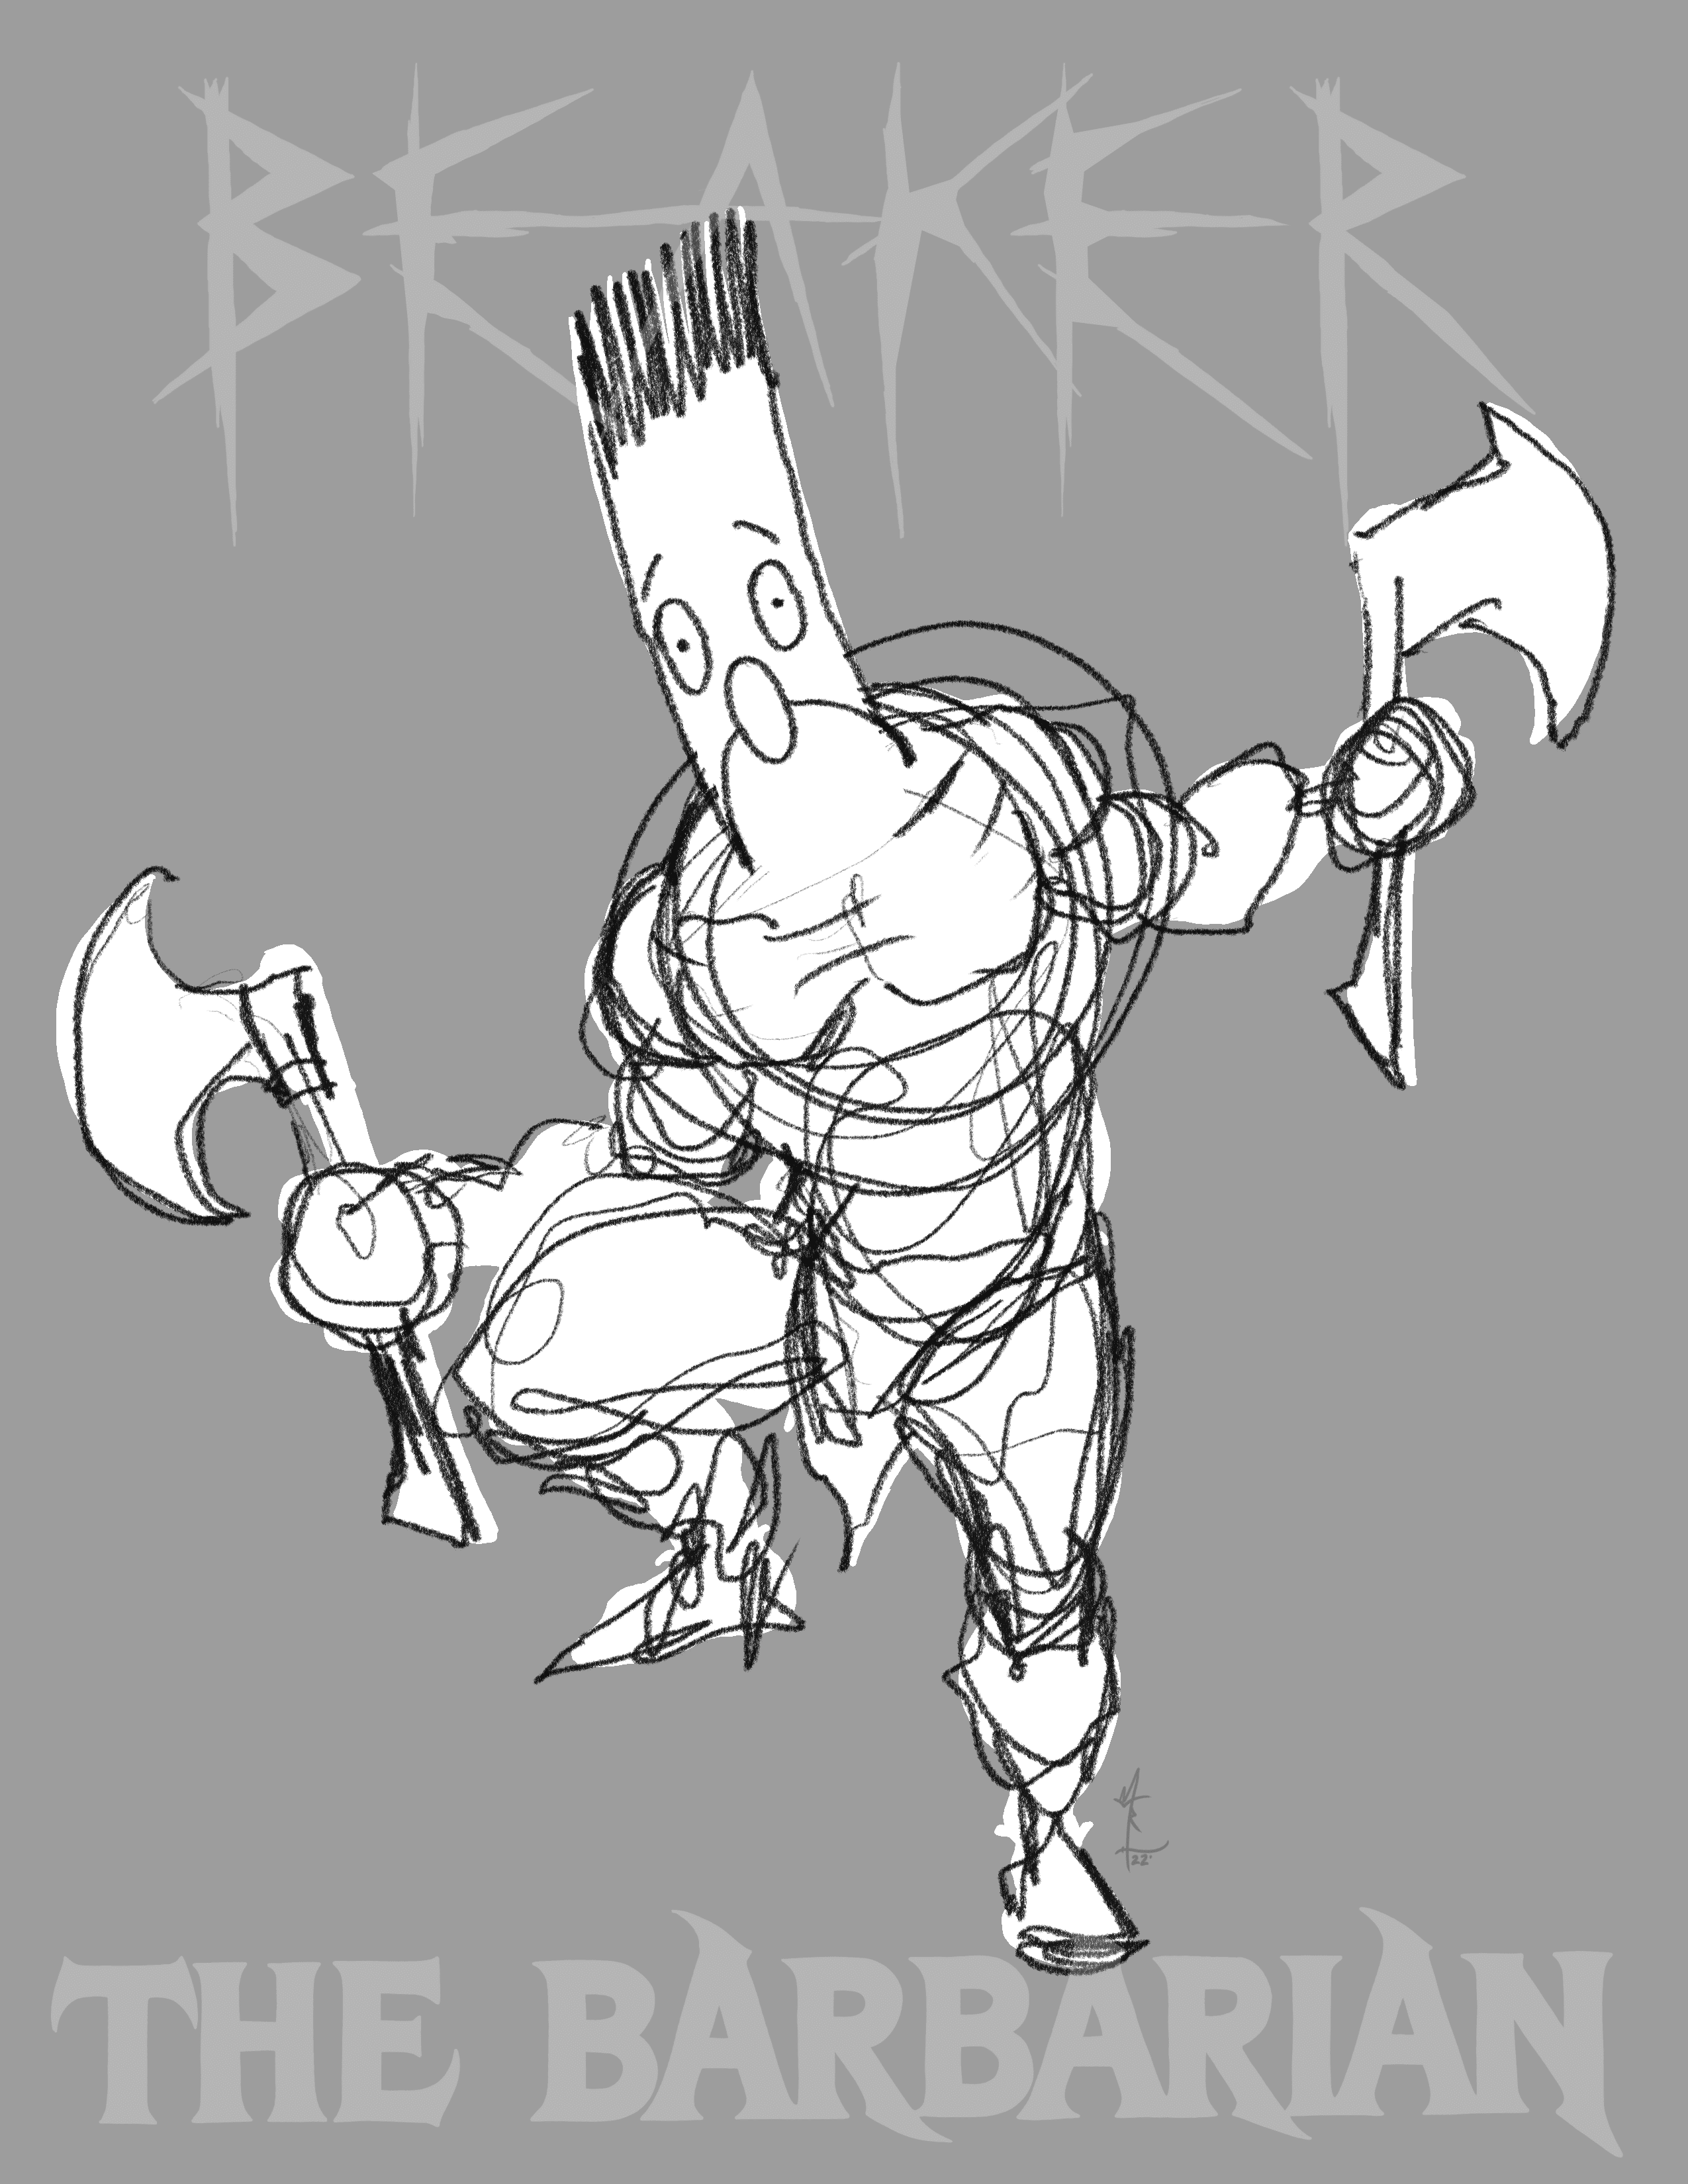 A sketch of Beaker the Barbarian. This is Beaker of the Muppets with Arnold Schwarzenegger’s physique.